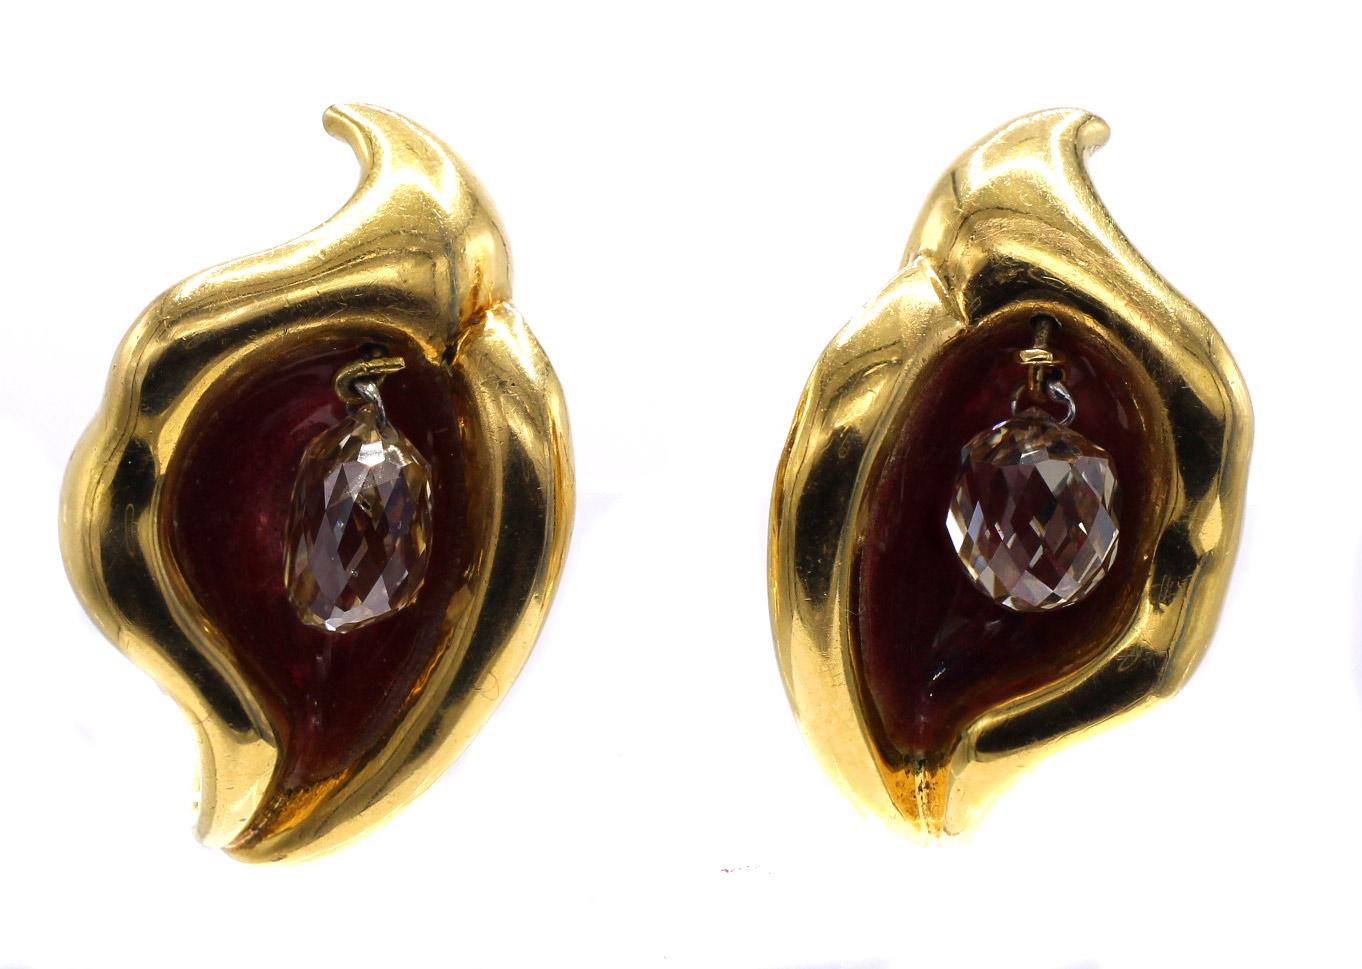 Beautifully designed by Elsa Peretti and masterfully handcrafted by Tiffany & Co these one of a kind ear clips are a true work of art on the ear. Crafted in 18 karat yellow gold in the abstract form of a flower embellished on the interior with